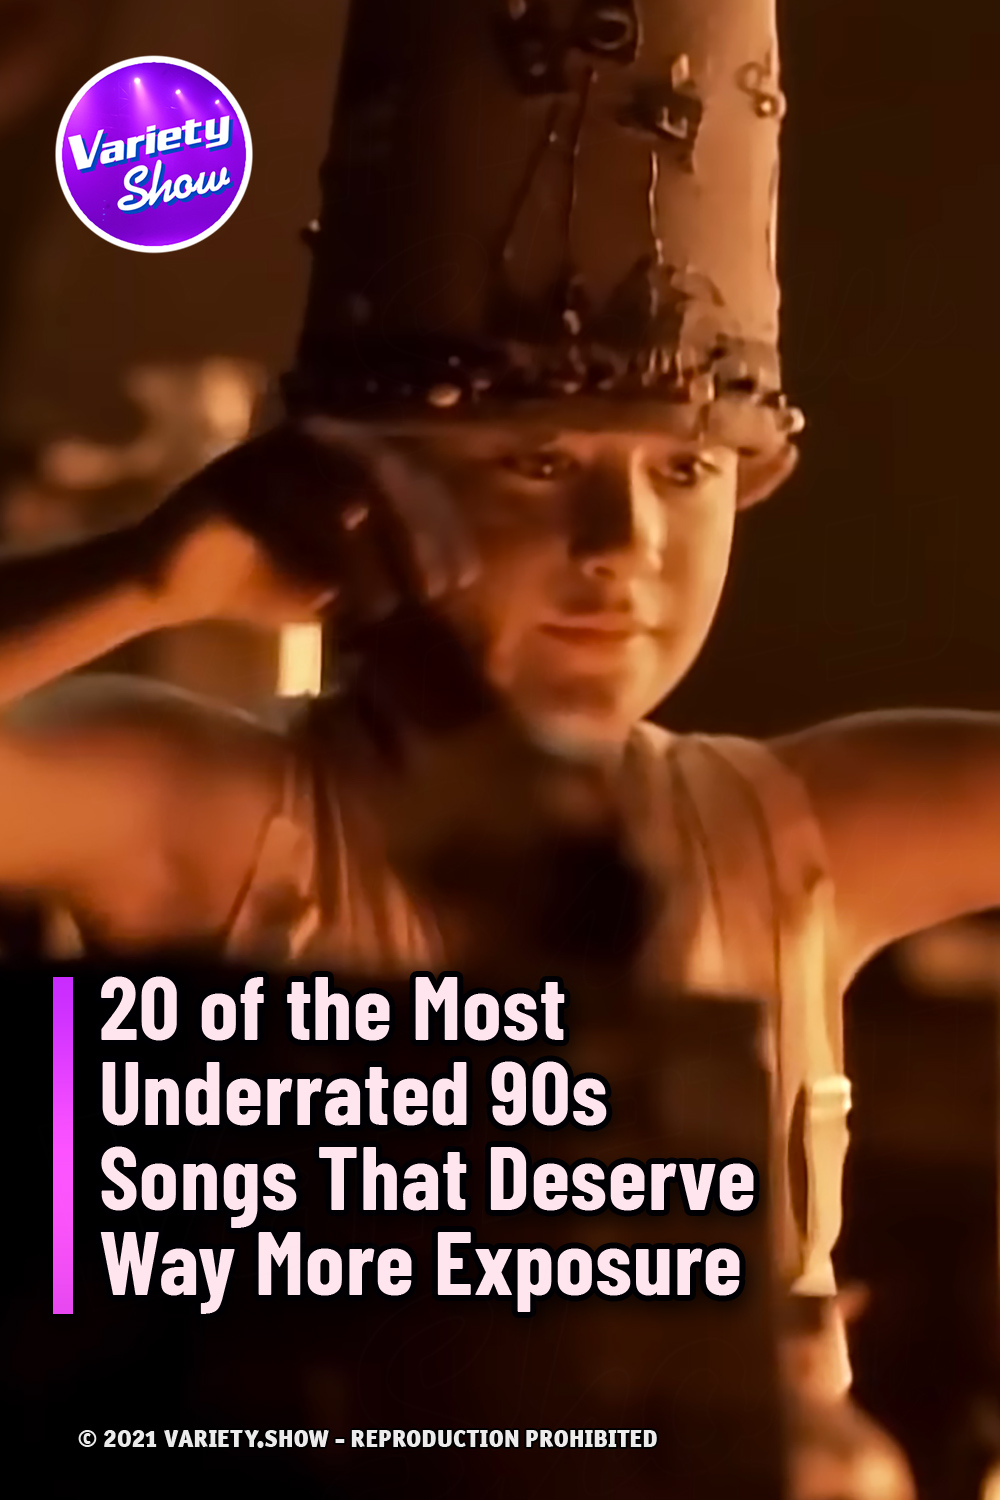 20 of the Most Underrated 90s Songs That Deserve Way More Exposure